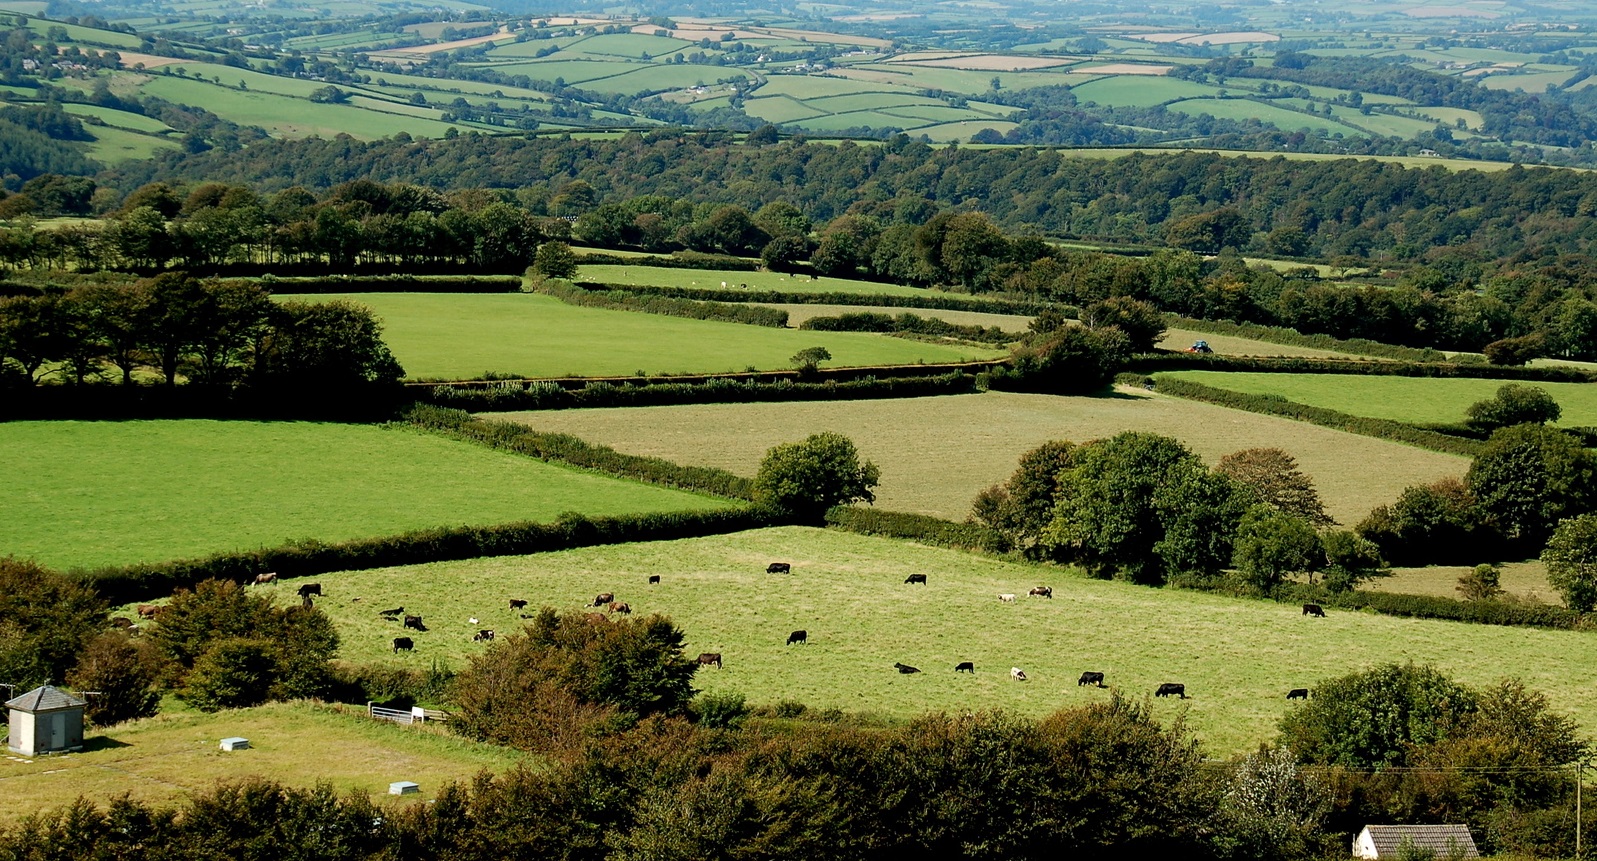 A view from the top of a hill over green patchwork fields and hedgerows with cows grazing and a line of woodland in the background